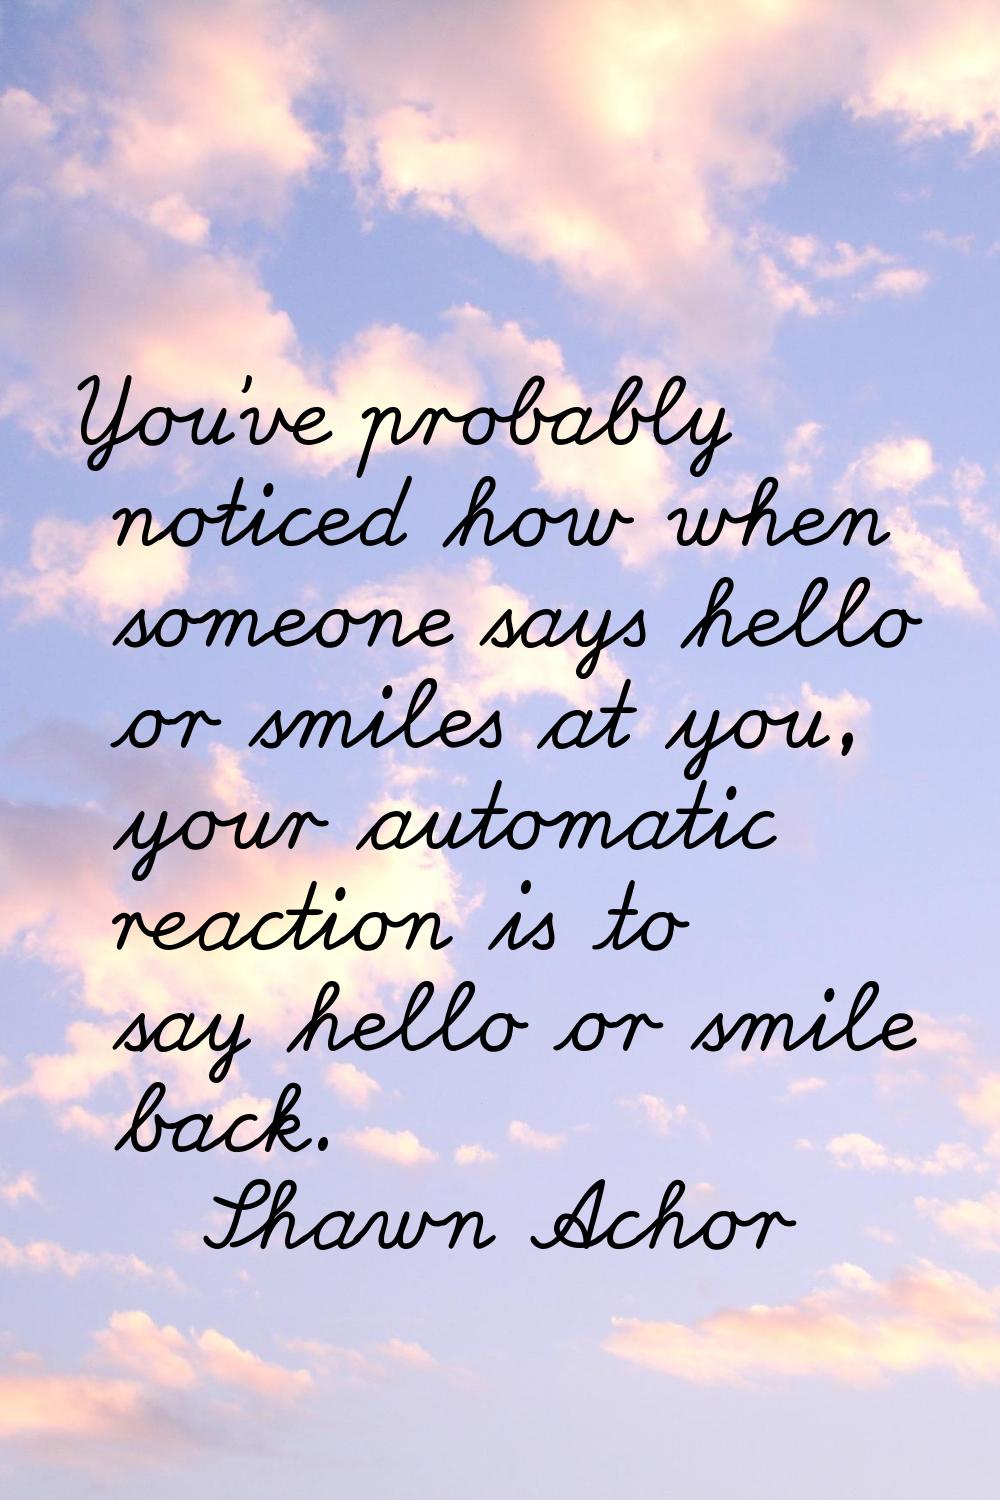 You've probably noticed how when someone says hello or smiles at you, your automatic reaction is to